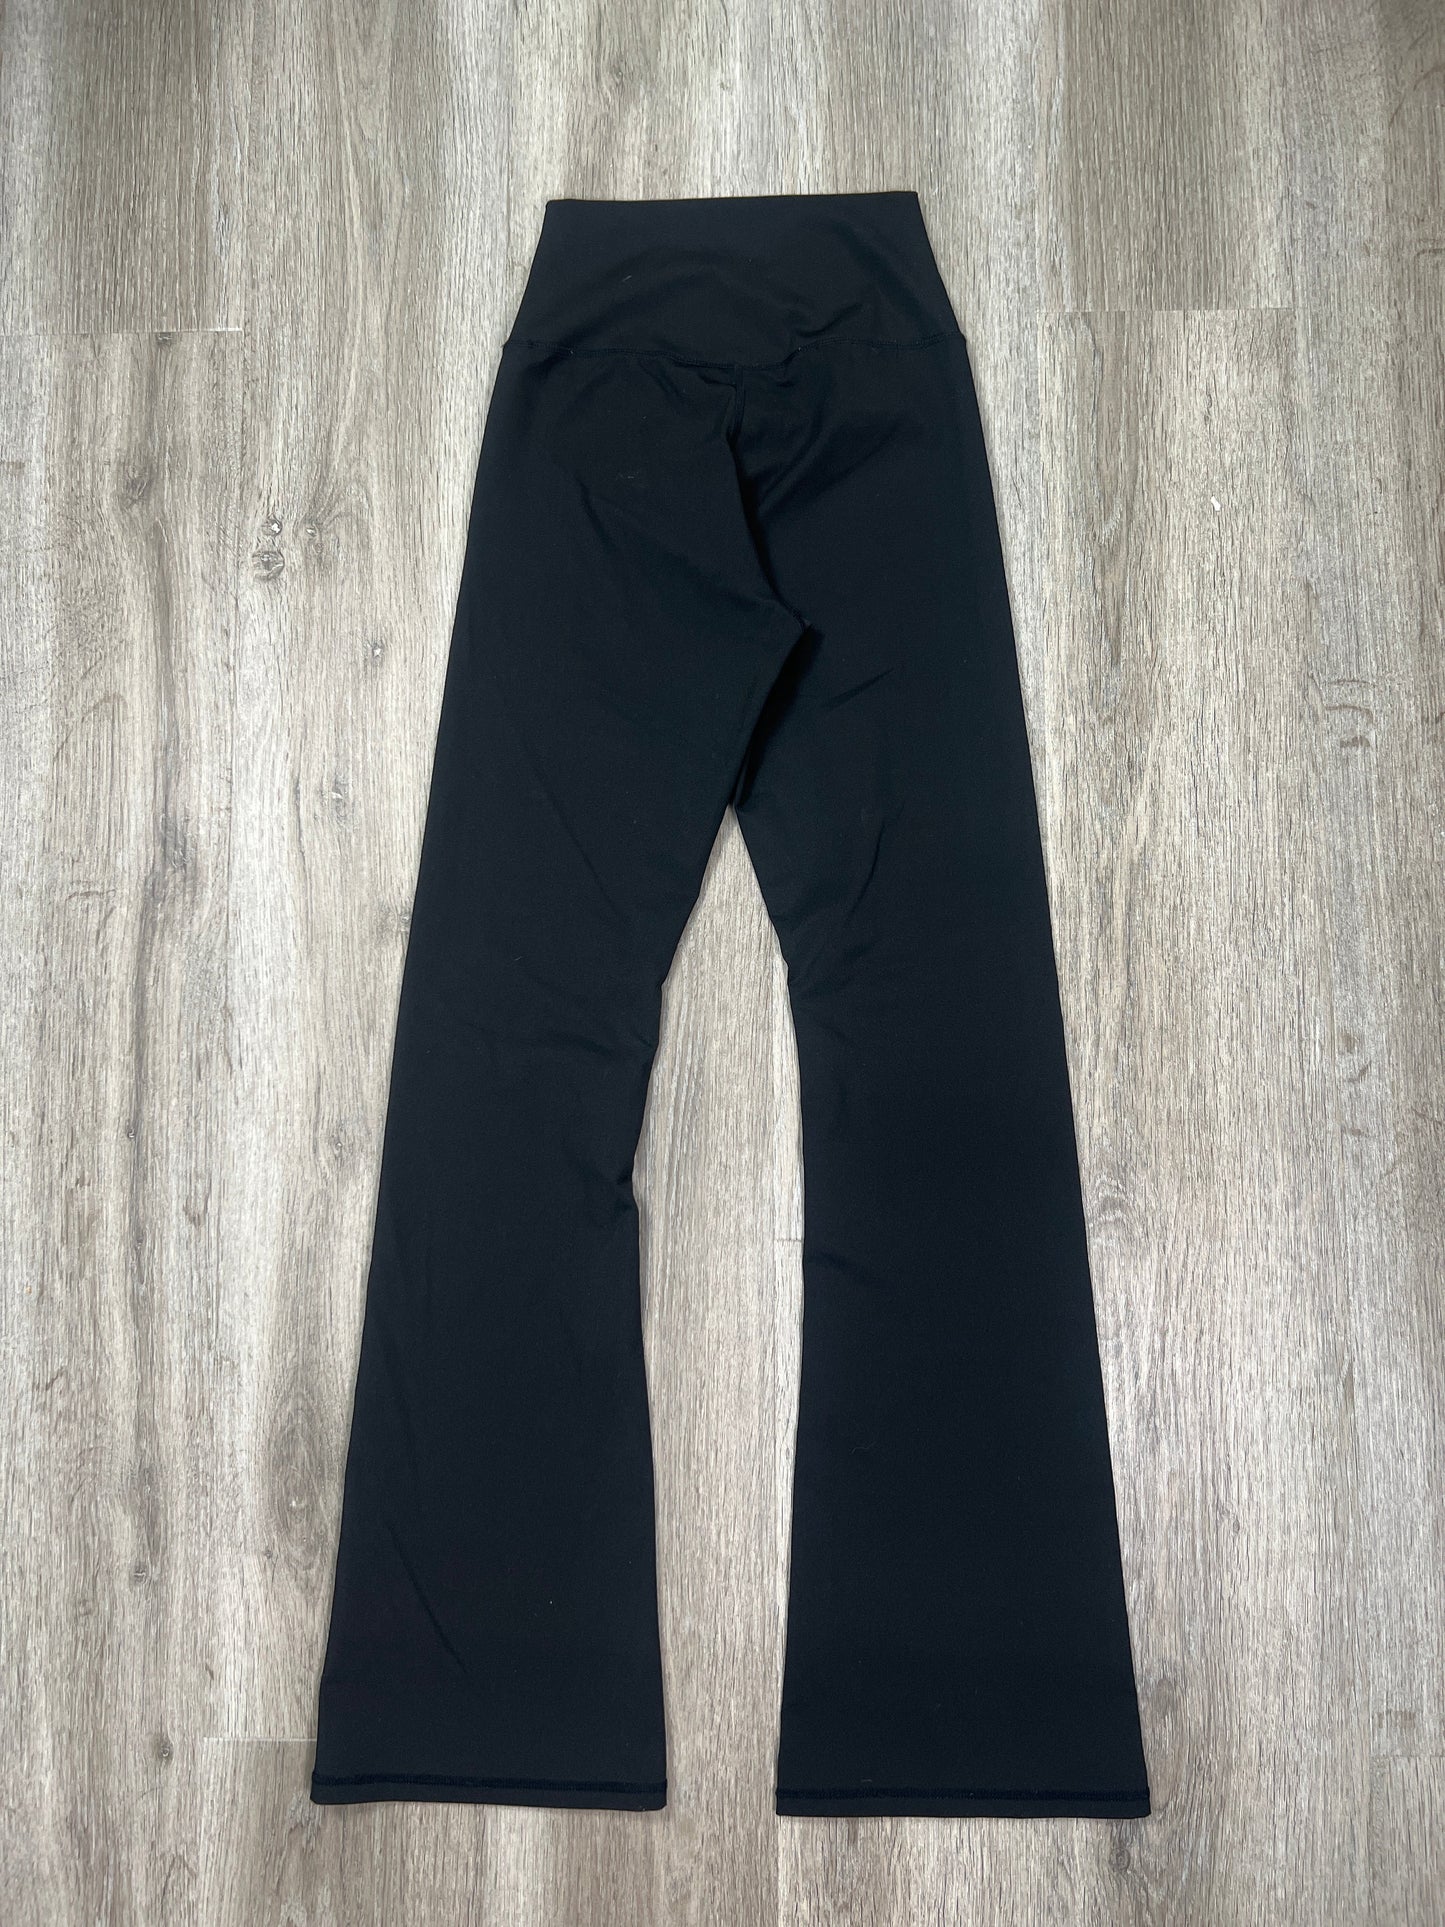 Athletic Leggings By Clothes Mentor  Size: Xs